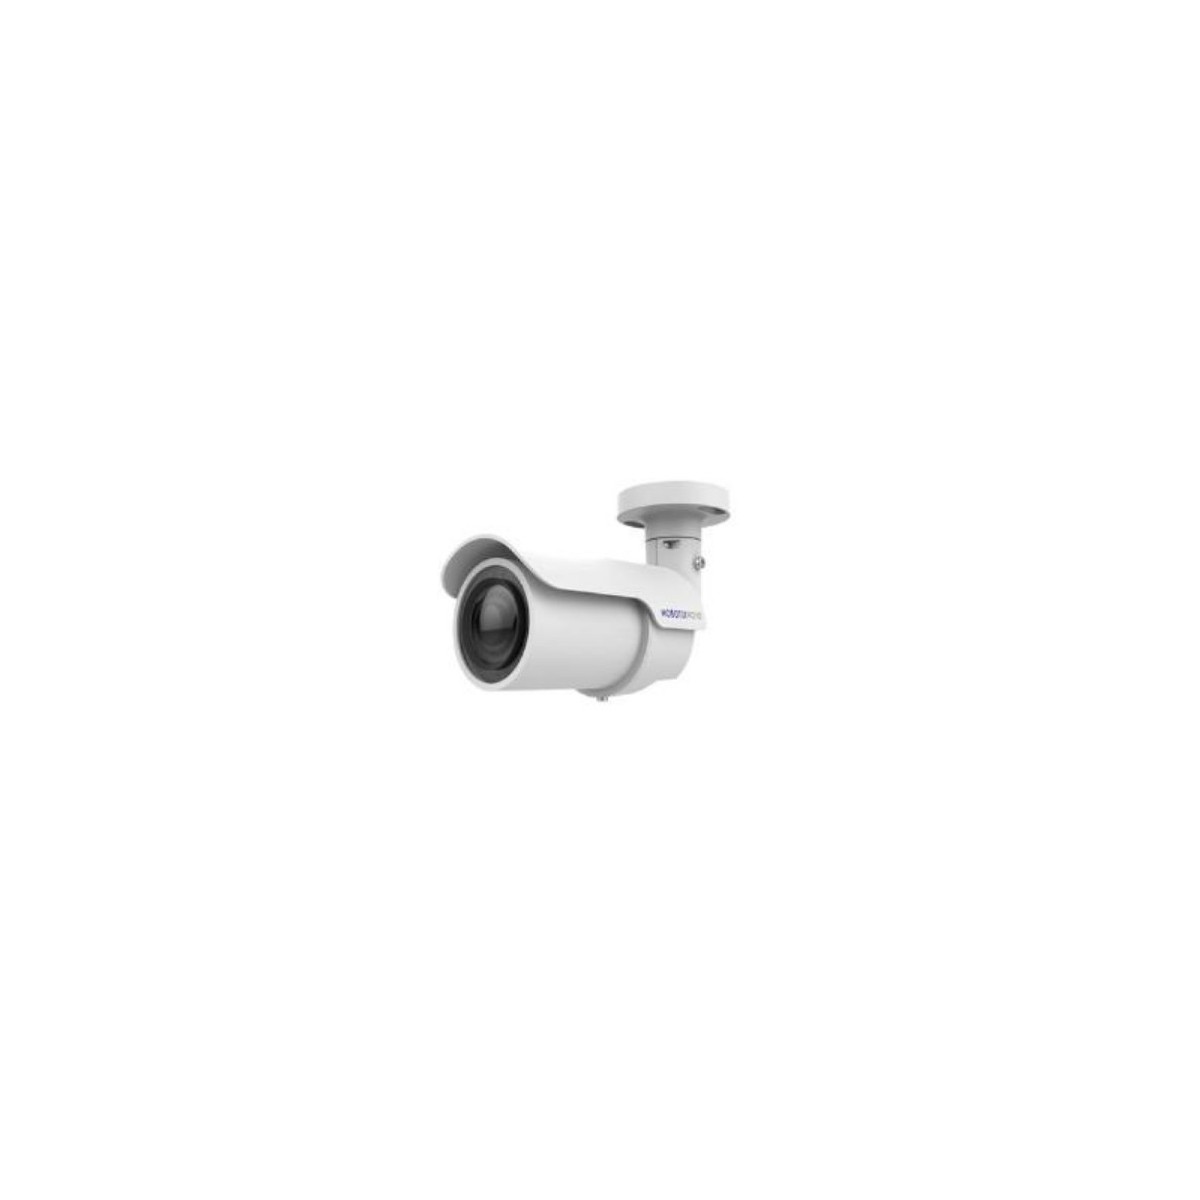 Mobotix MX-BC1A-4-IR - IP security camera - Indoor  outdoor - Wired - Bullet - White - IP66